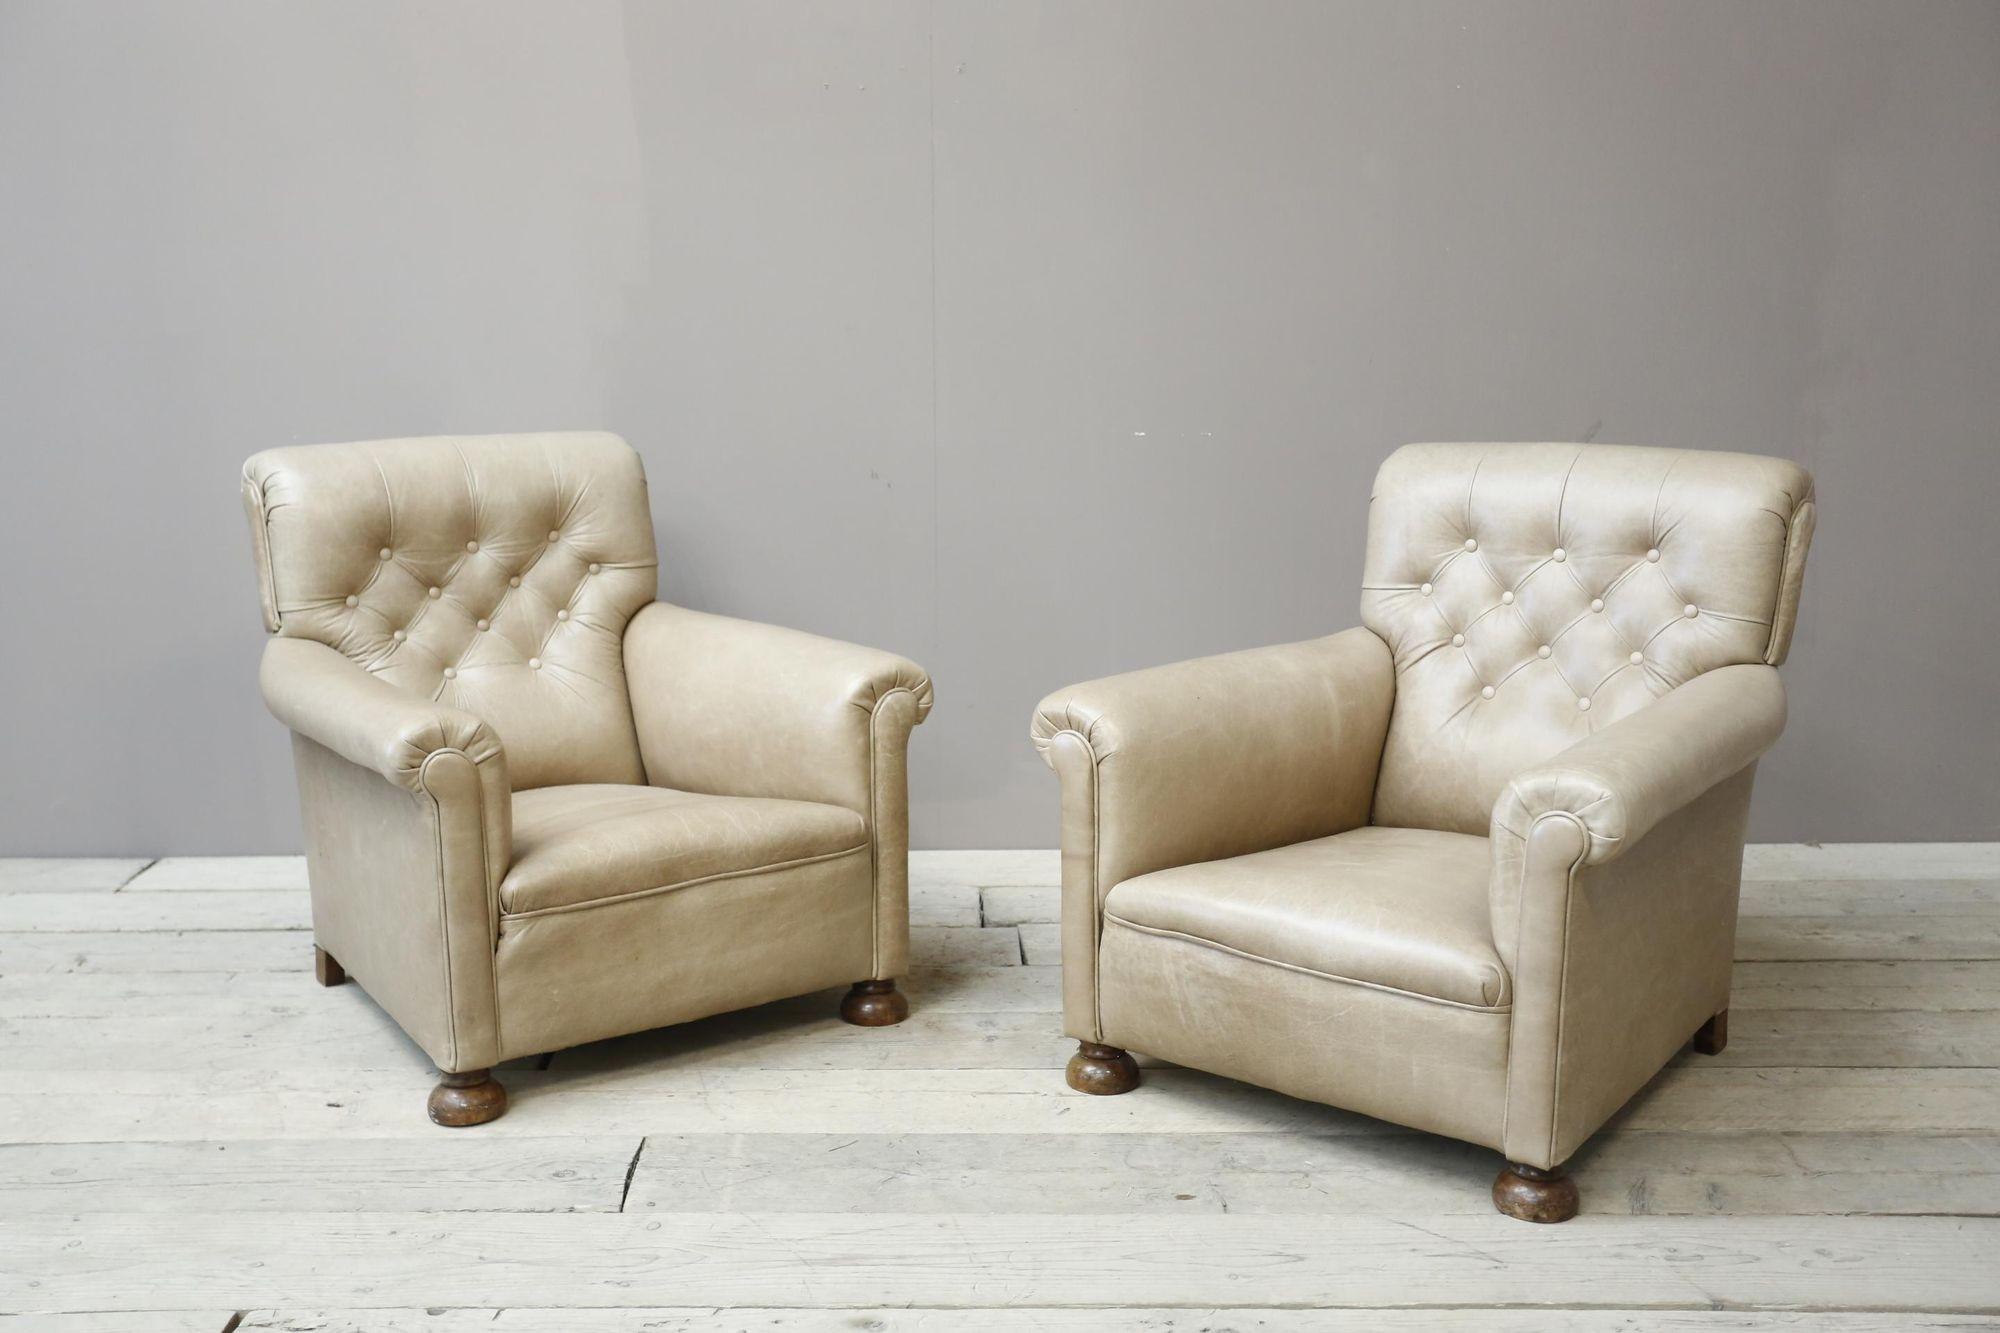 Pair of 1920's English deep seated armchairs In Good Condition For Sale In Malton, GB